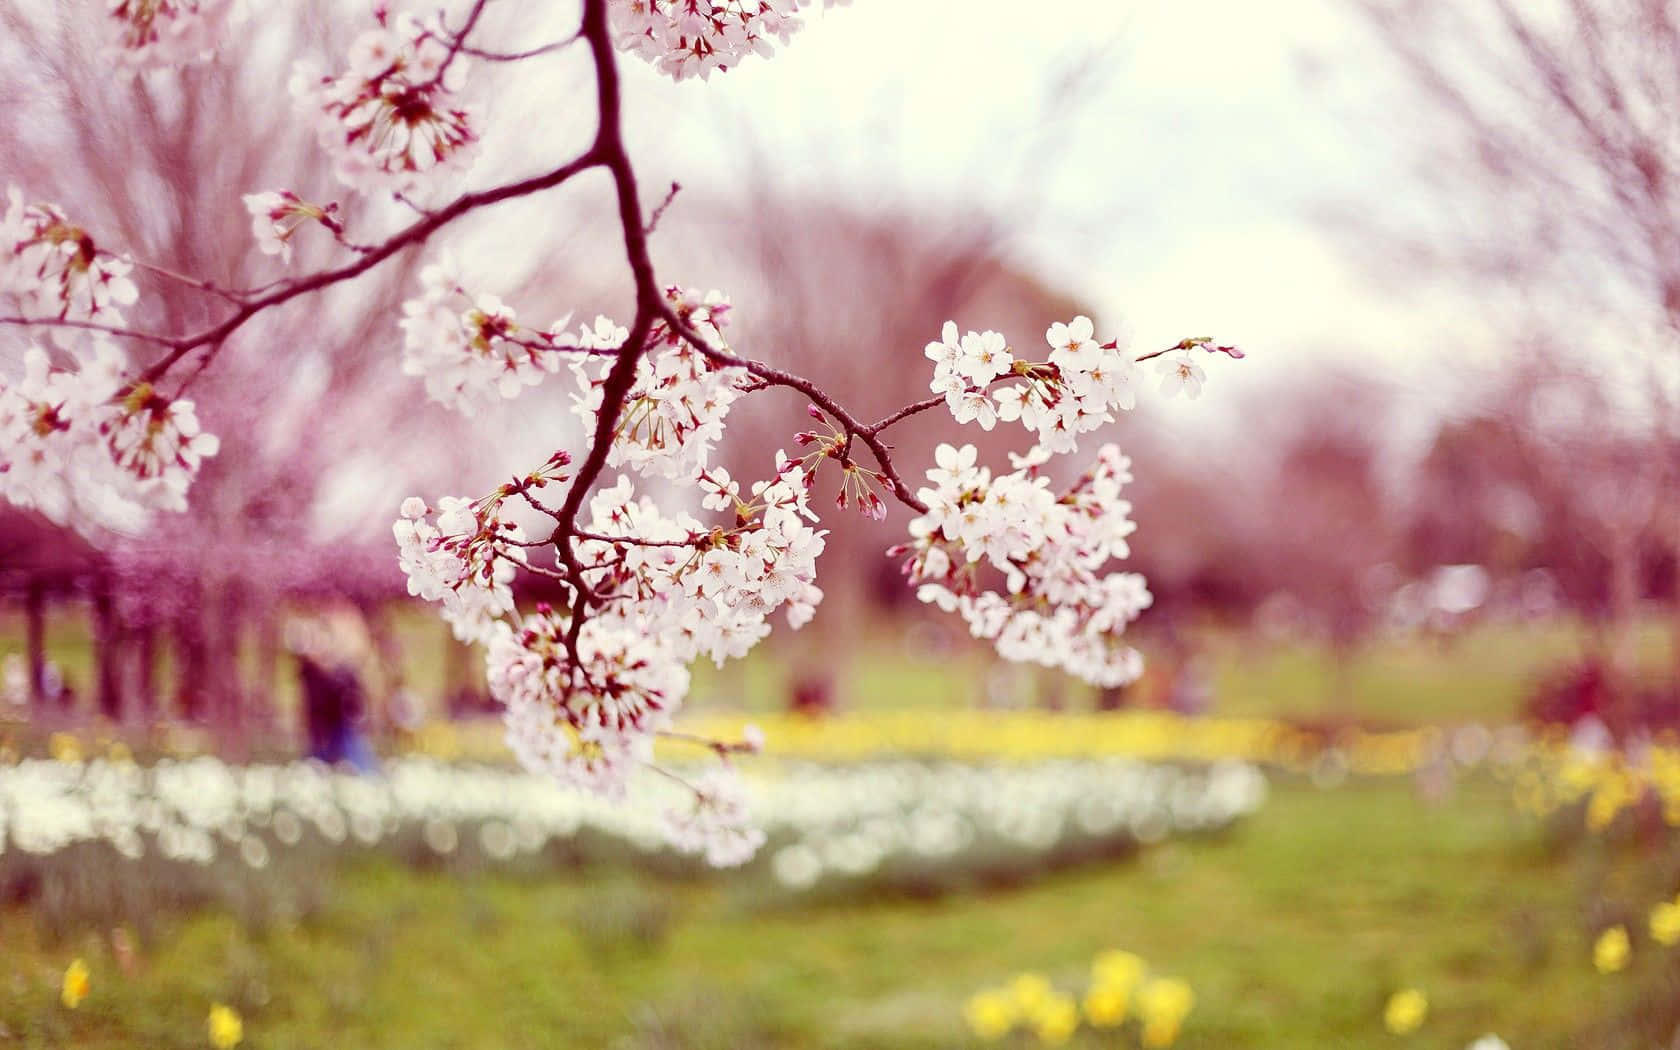 "Welcome the Beauty of Spring Time"